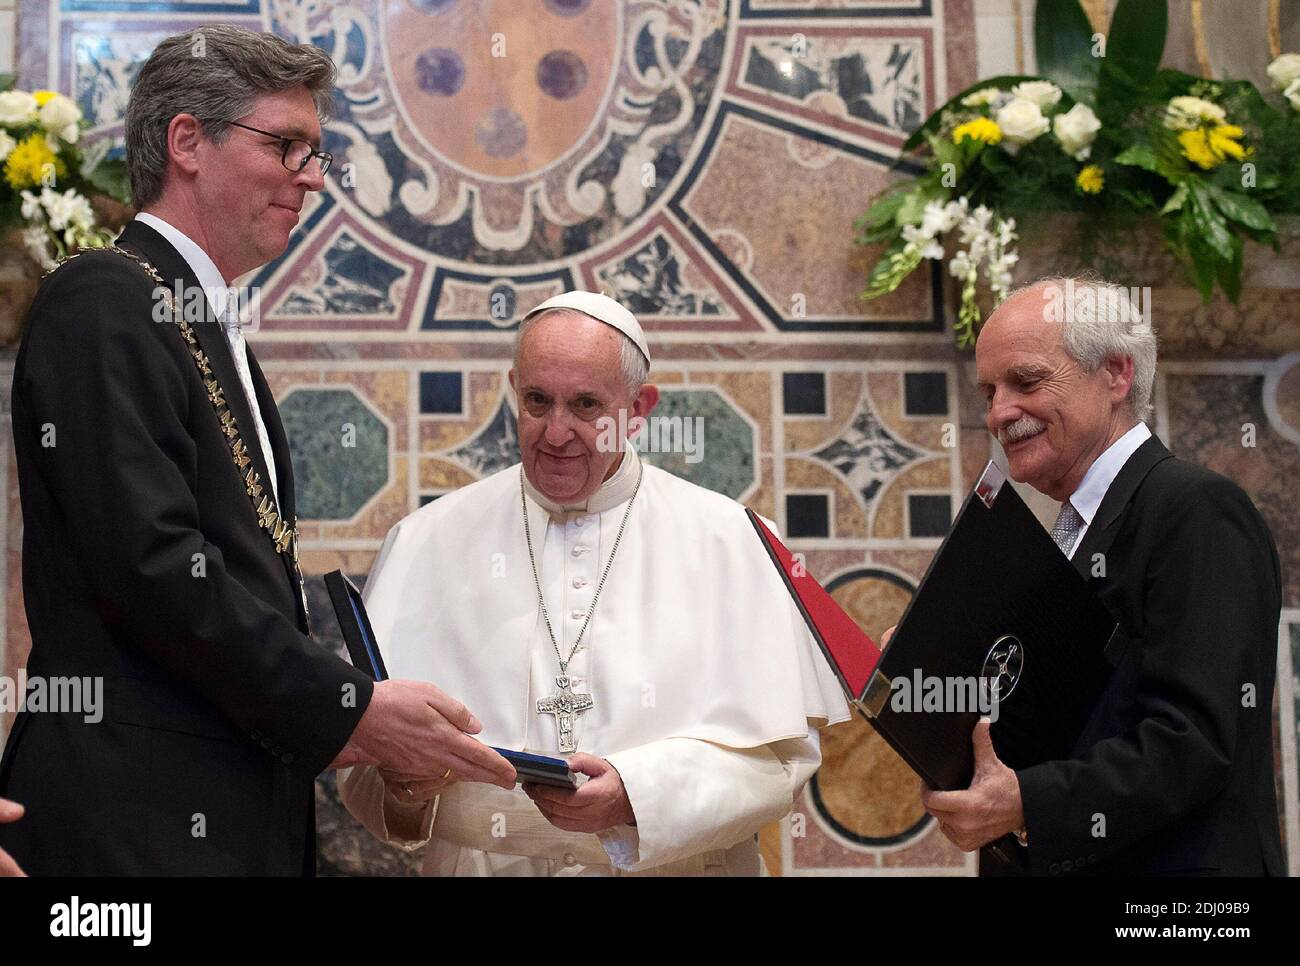 Pope Francis received the Charlemagne Prize from mayor of Aachen Marcel  Philipp (left) and Juergen Linden (right) during a ceremony at the Reggia  Hall on May 6, 2016 in Vatican City, Vatican.